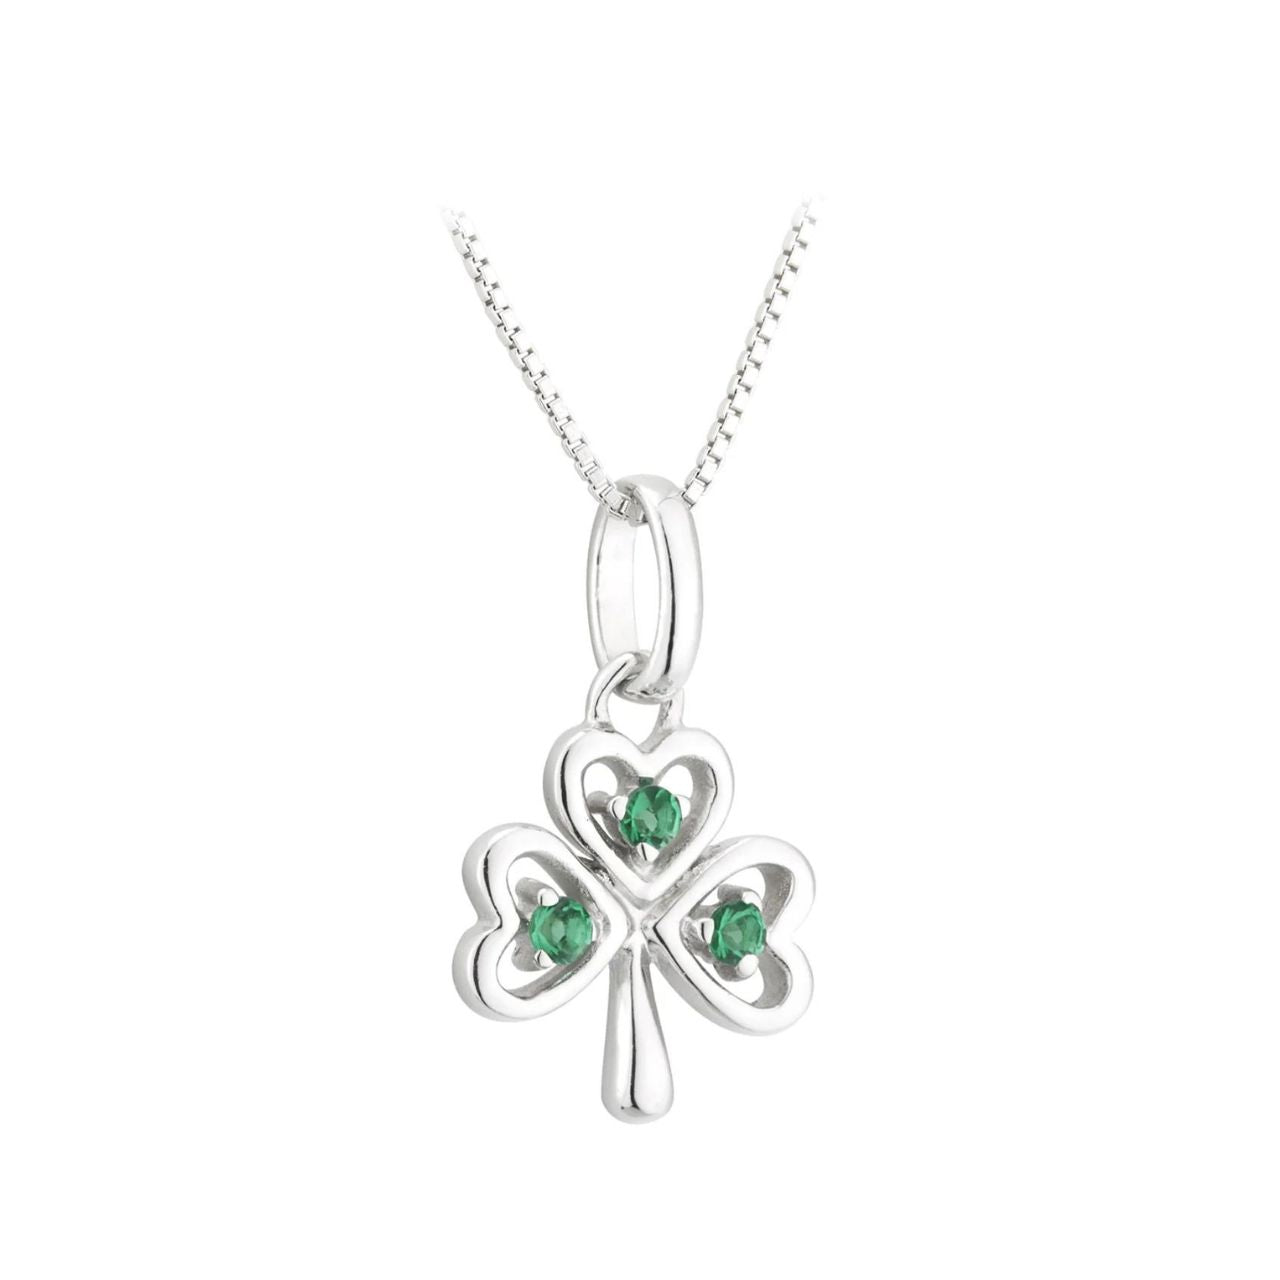 Sterling Silver Shamrock Necklace with Emerald Green Stones  This Solvar Sterling Silver Acara Shamrock Pendant With Green CZ necklace, crafted with sterling silver and a shamrock design, is a stylish piece of jewelry perfect for everyday wear. The delicate form of the shamrock adds a meaningful touch to this sterling silver pendant, and the green cubic zirconia accents provide a captivating sparkle.